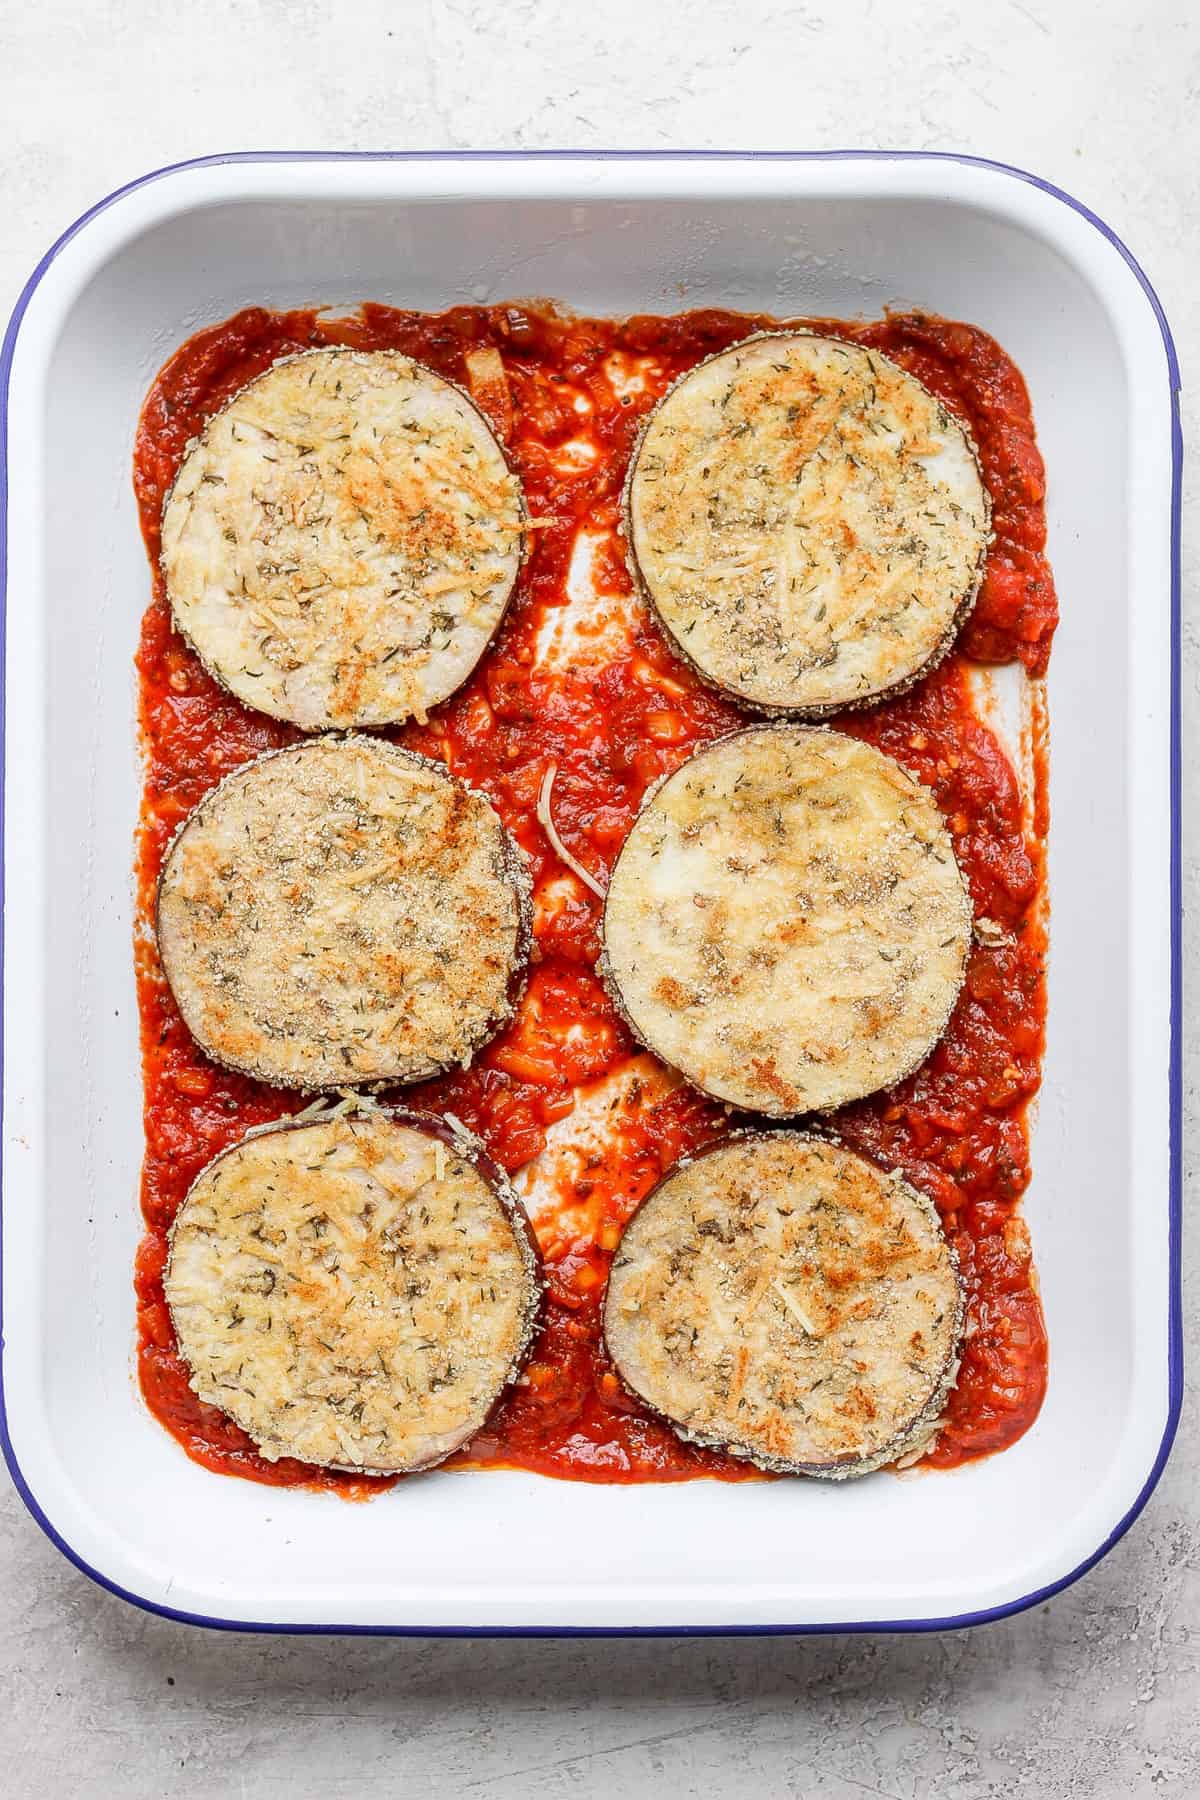 This $19 Tool Is the Secret to the Best Eggplant Parmigiana